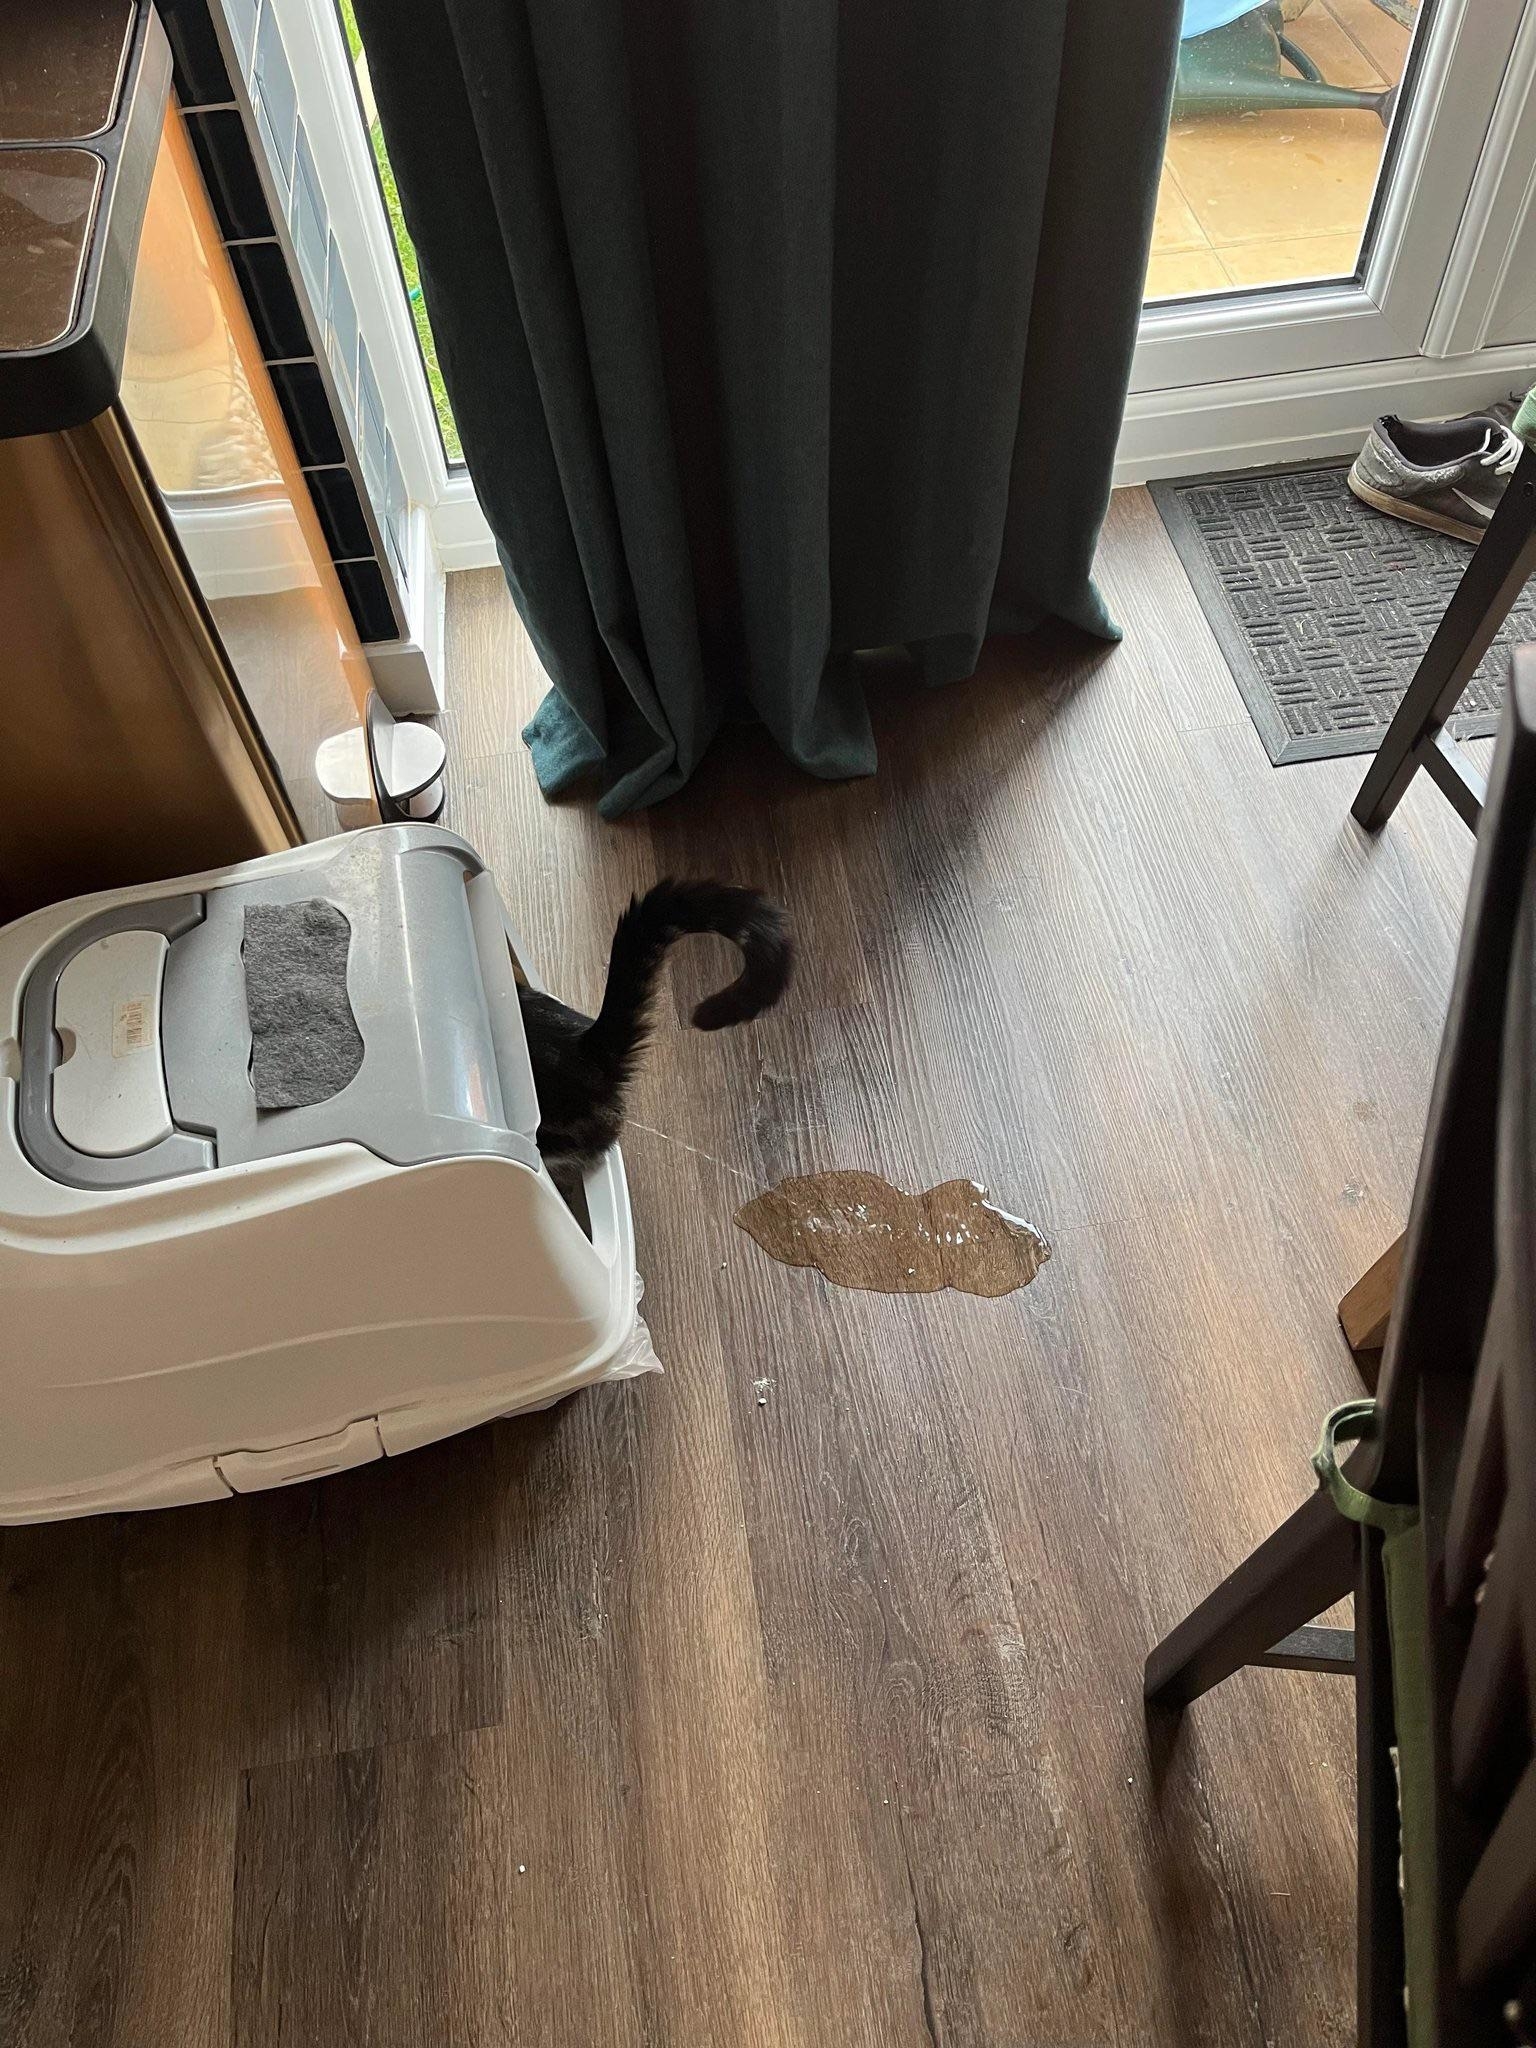 Cat partly hidden by curtain near a litter box, with a visible puddle on the floor